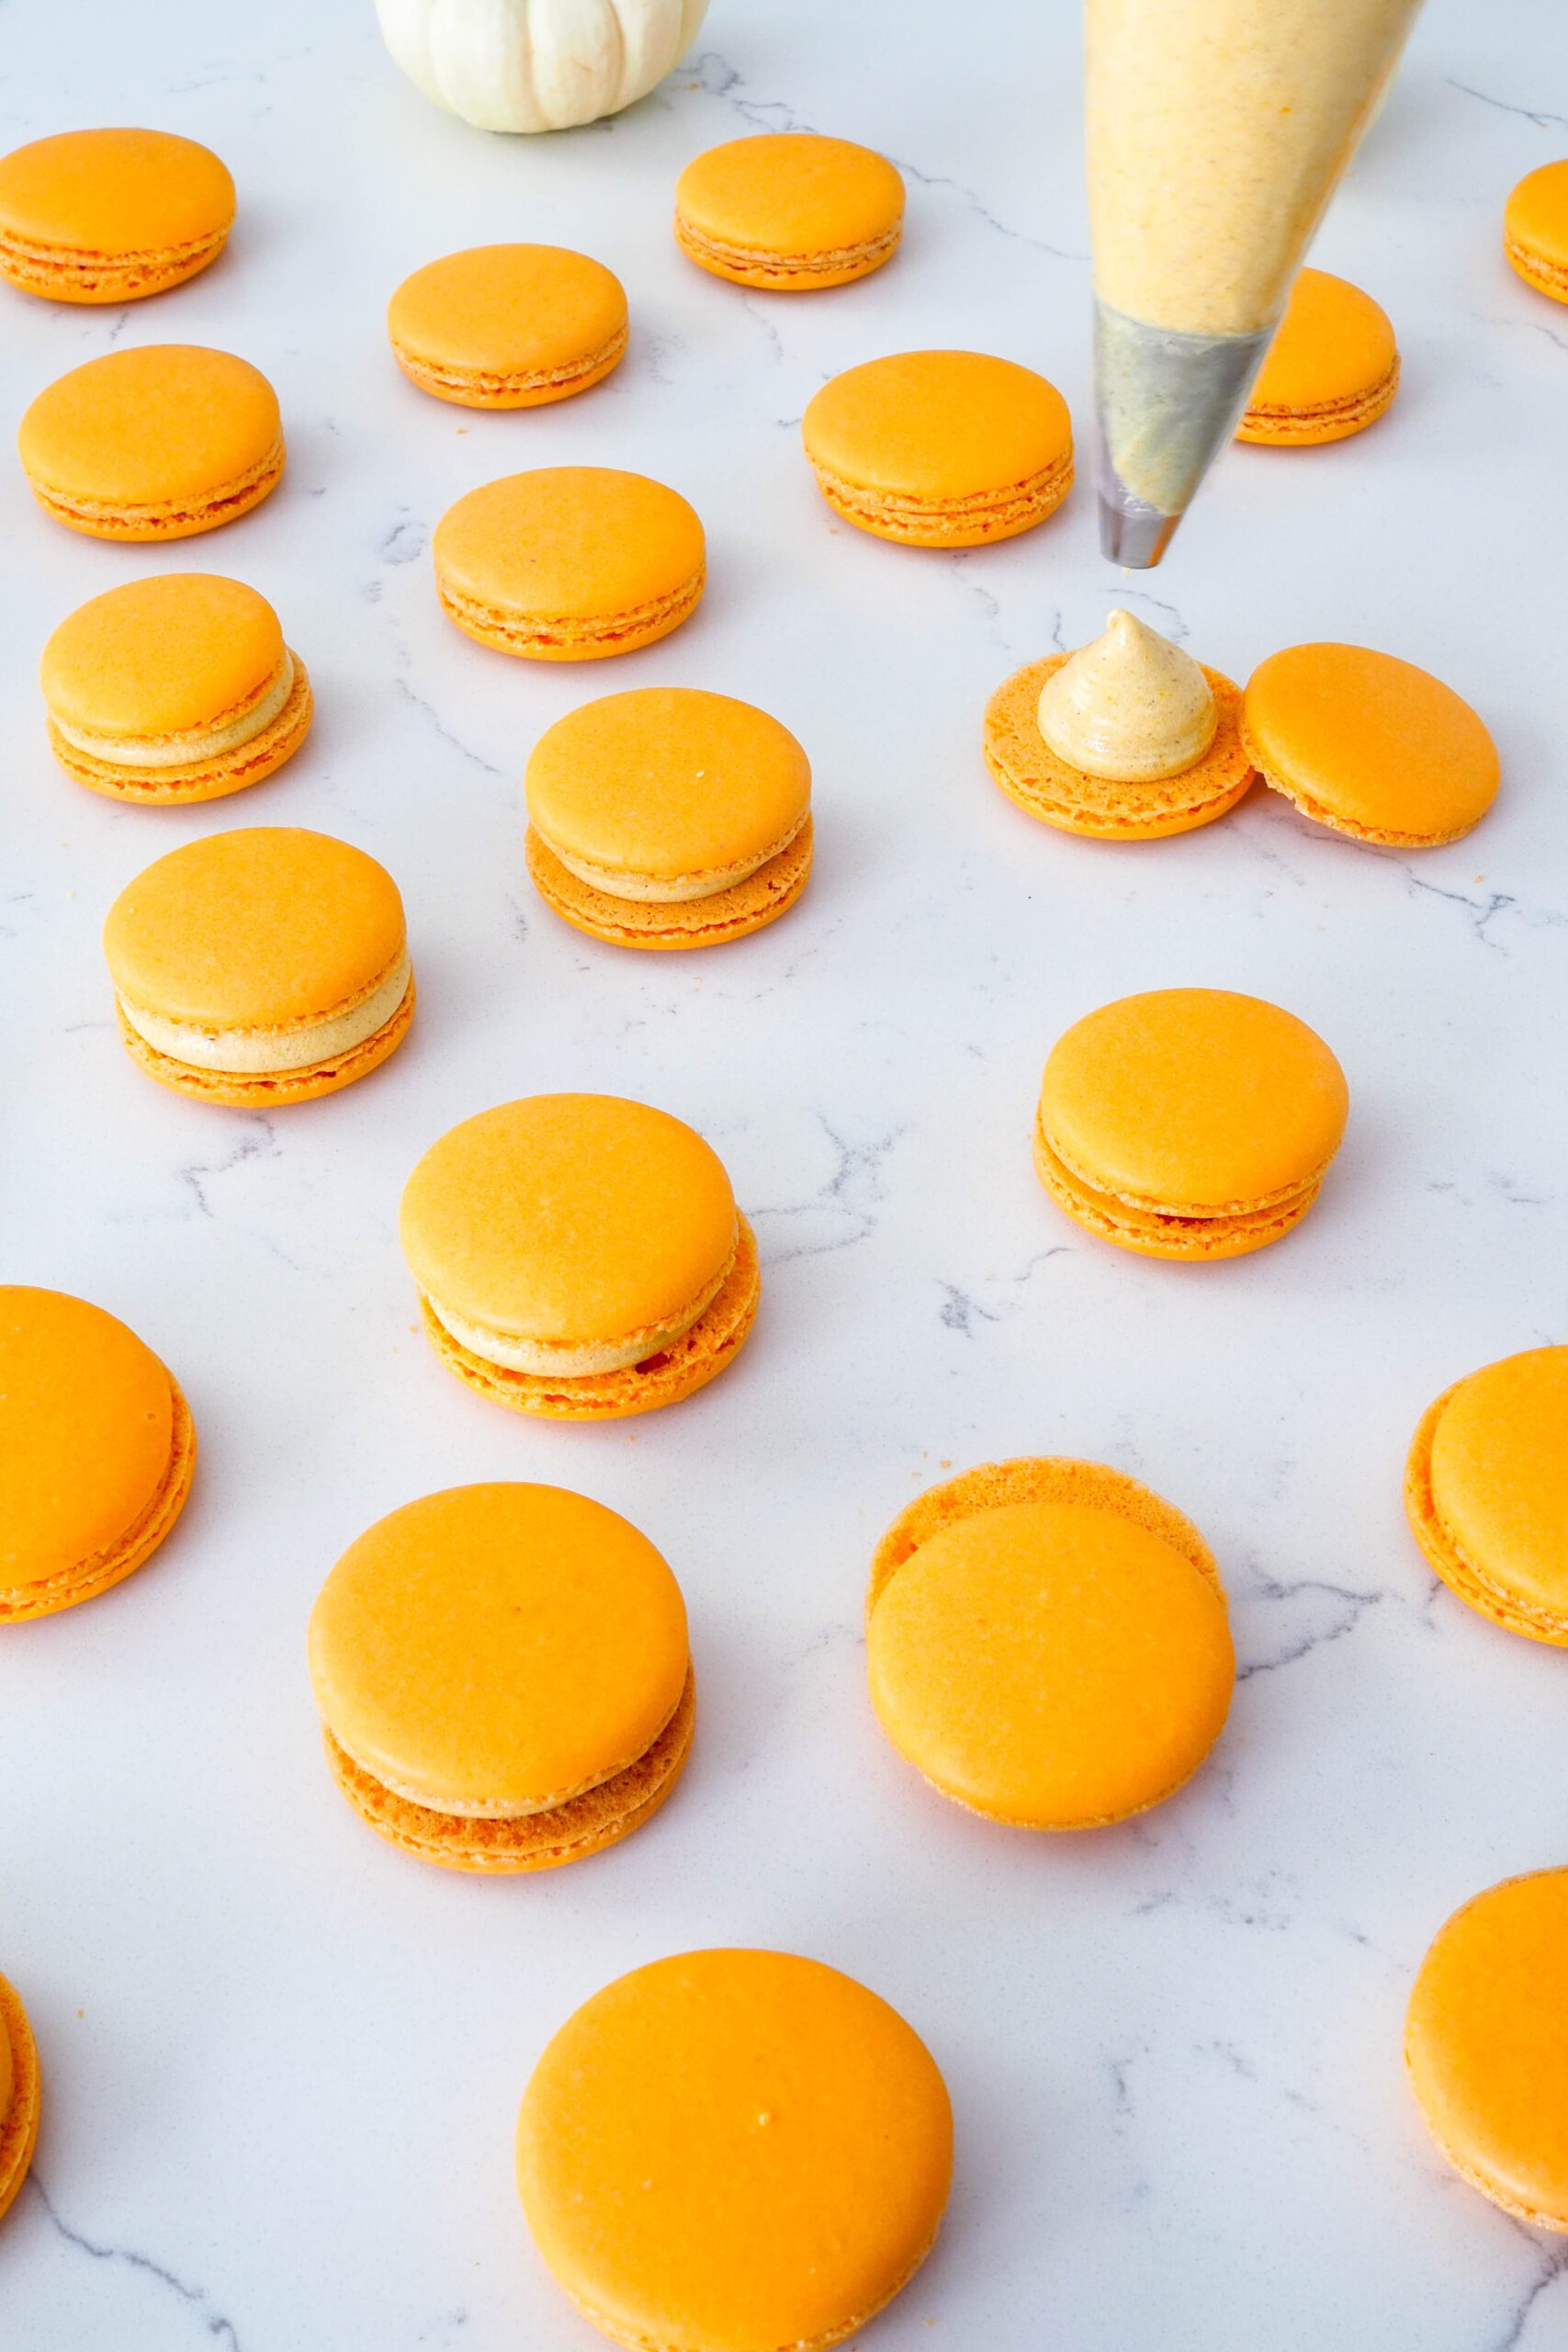 A piping bag fills one macaron, with a smattering of other macarons, filled and unfilled, around it.